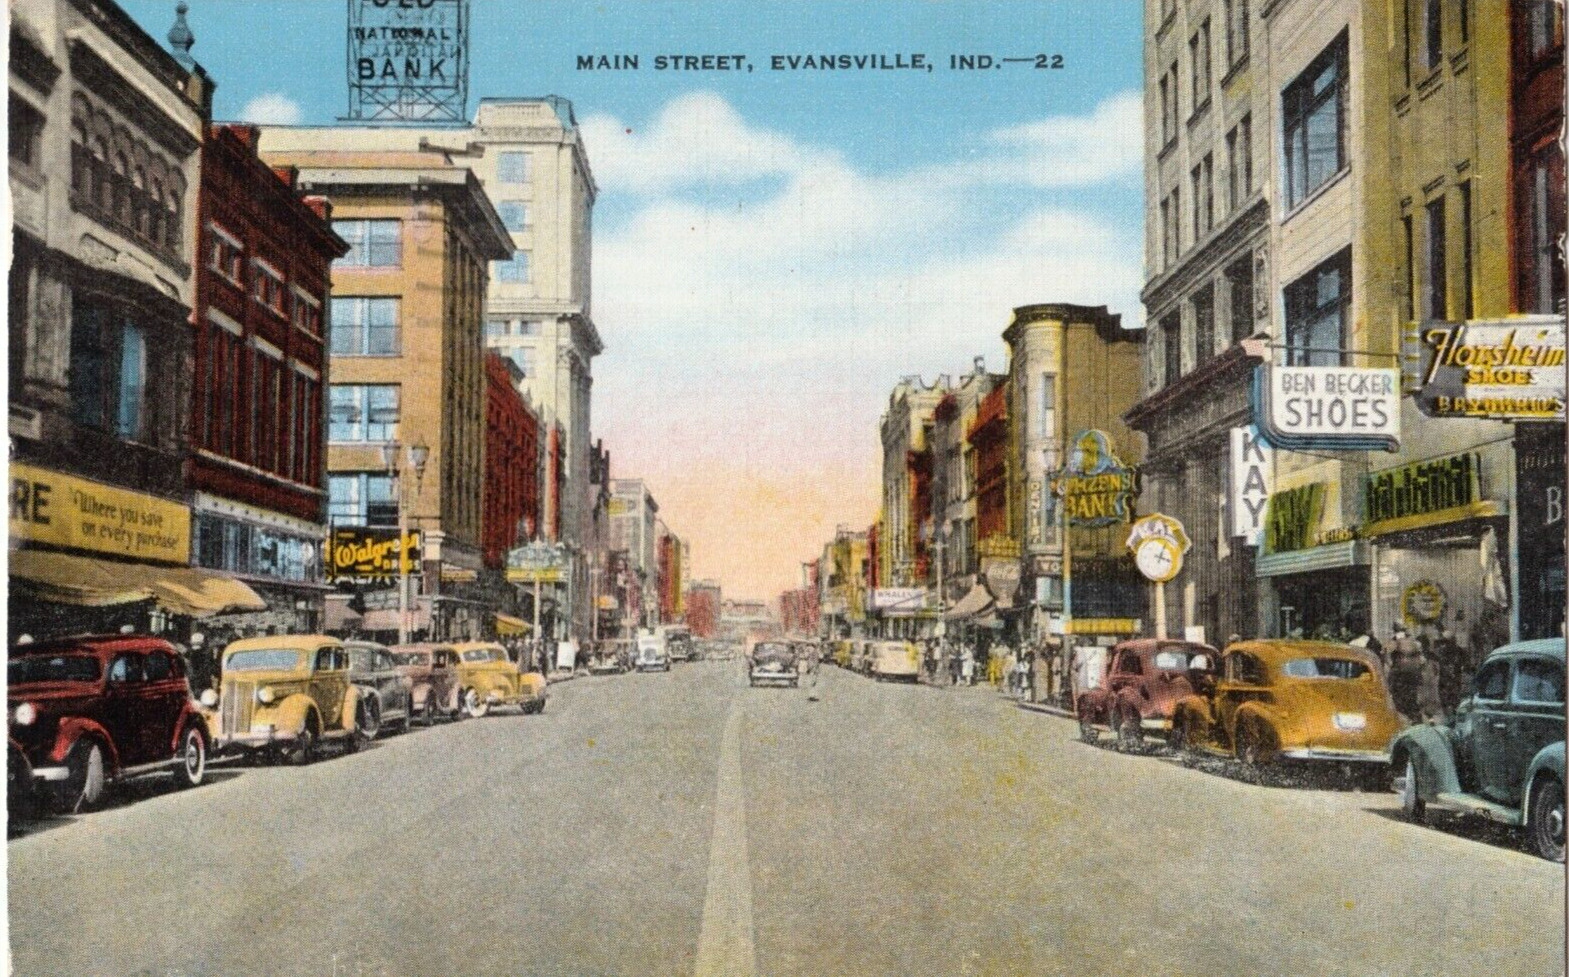 Main Street View-Evansville, Indiana IN-posted postcard